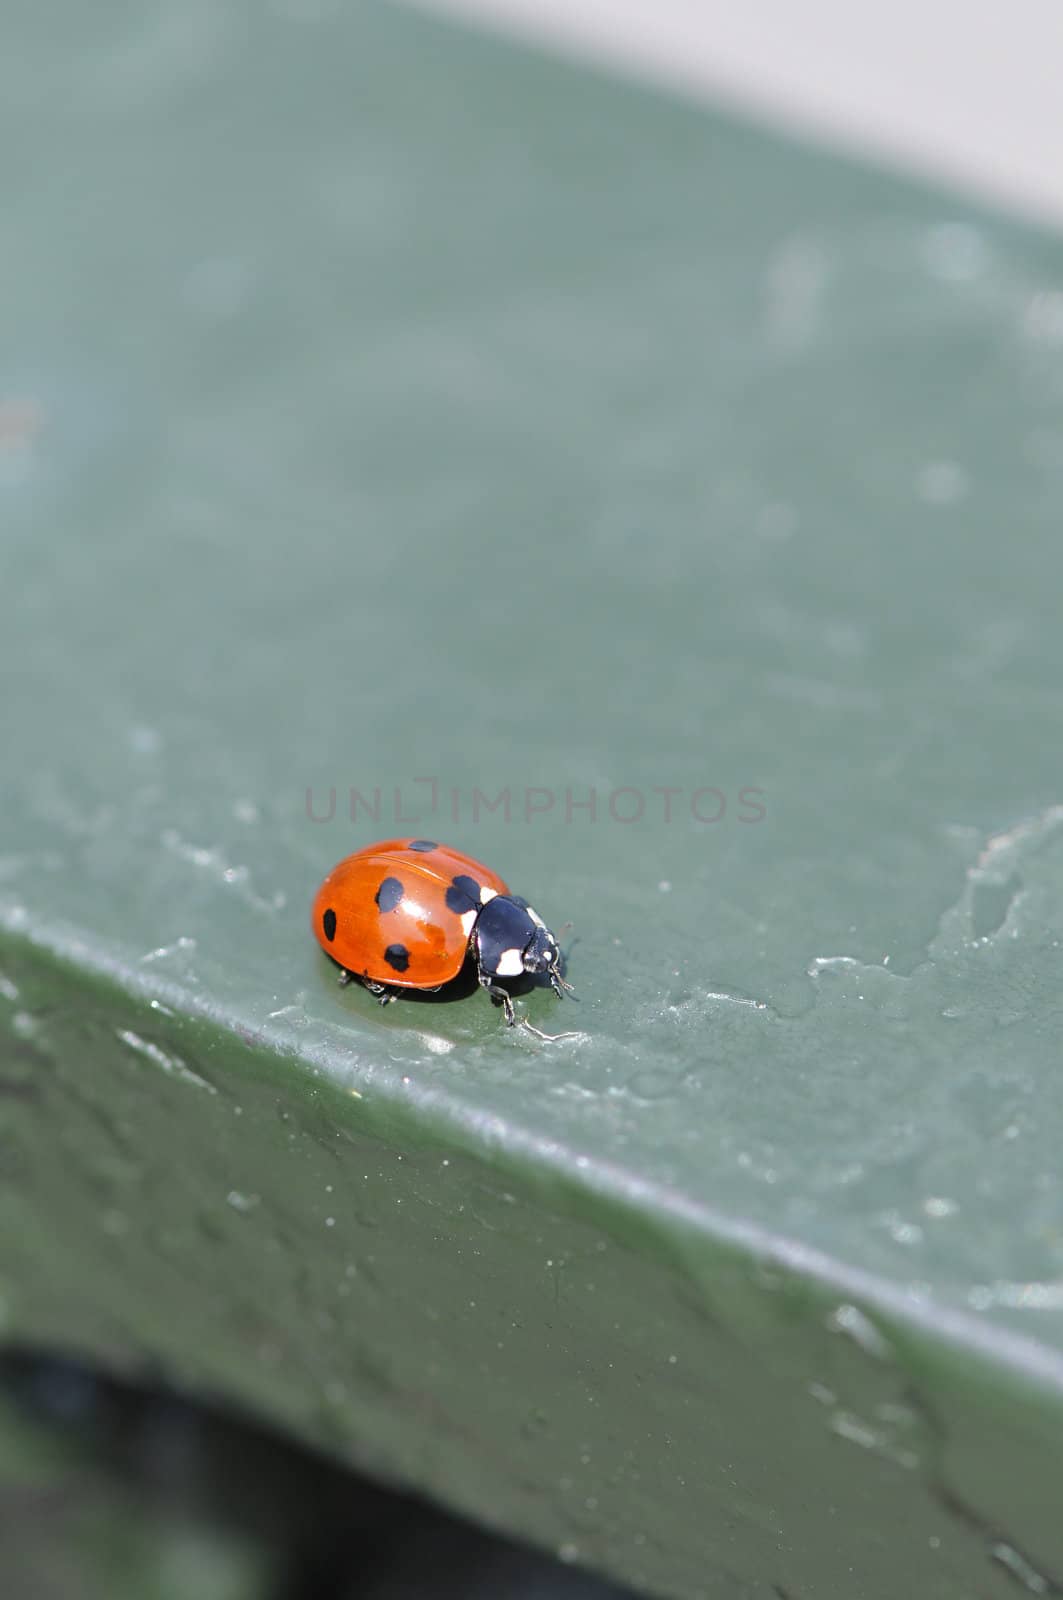 Red ladybug on a green guard rail by shkyo30